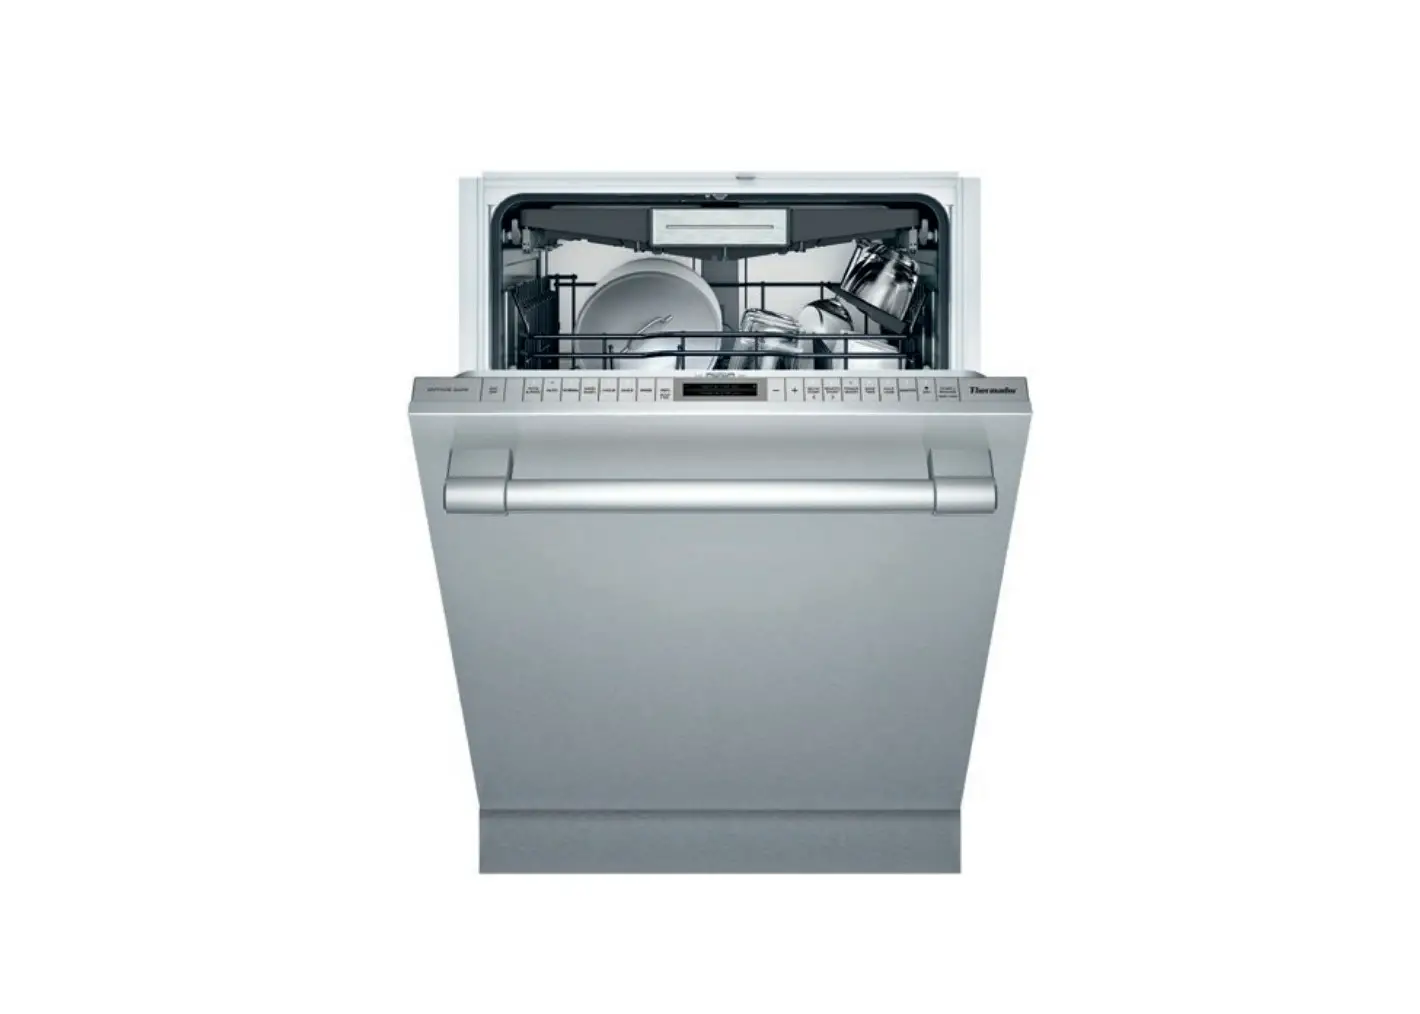 Thermador DWHD770WFP Sapphire 7-Program Dishwasher User Guide